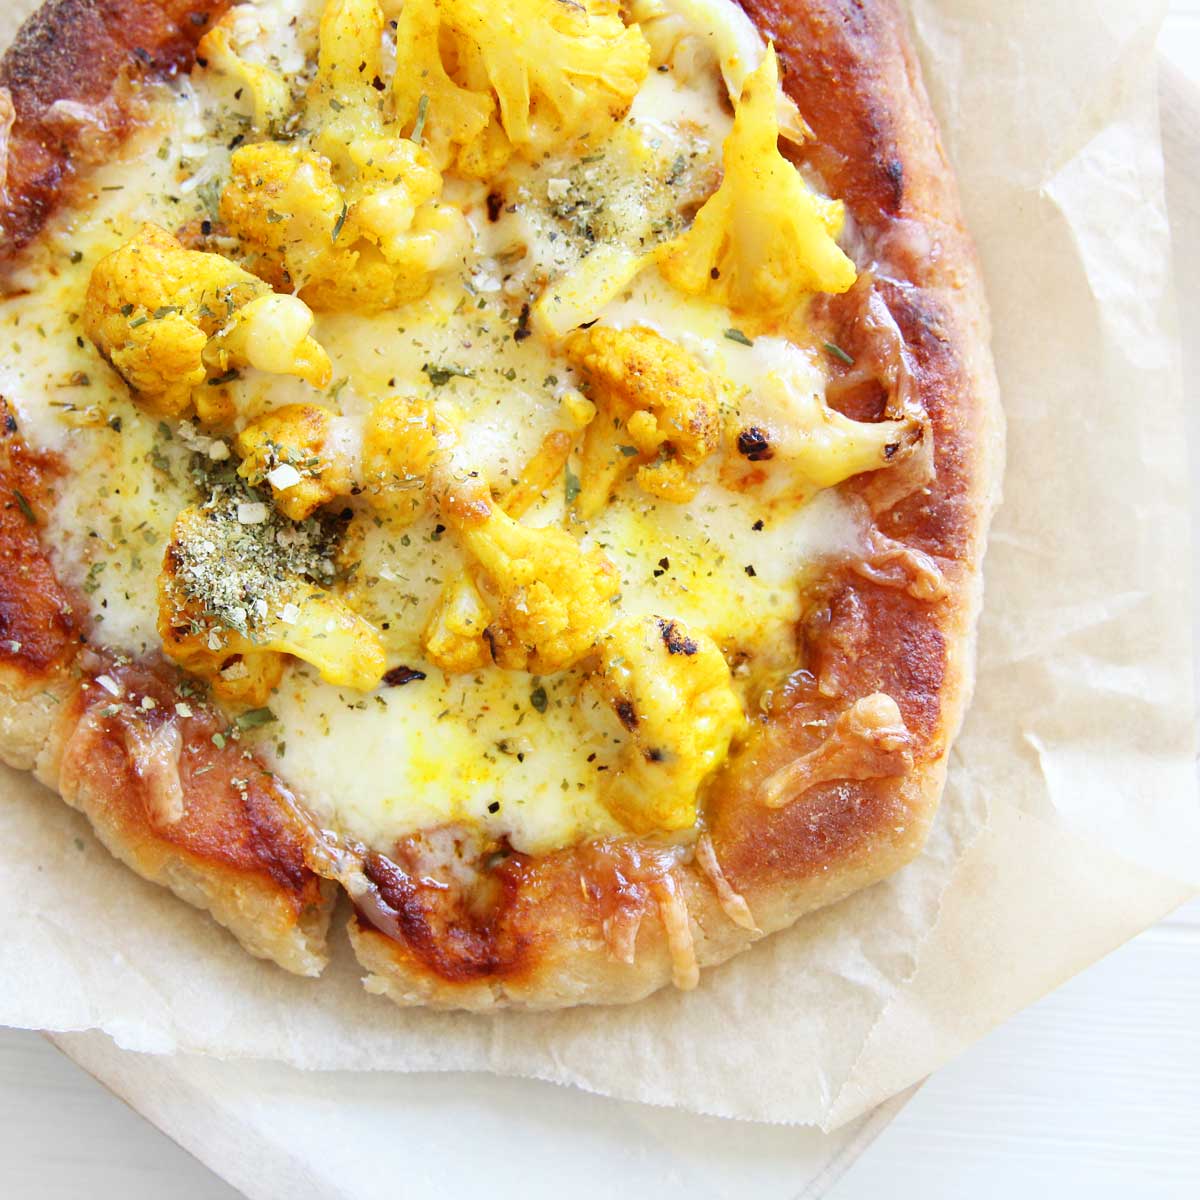 pizza naan ideas and recipes - curried cauliflower
